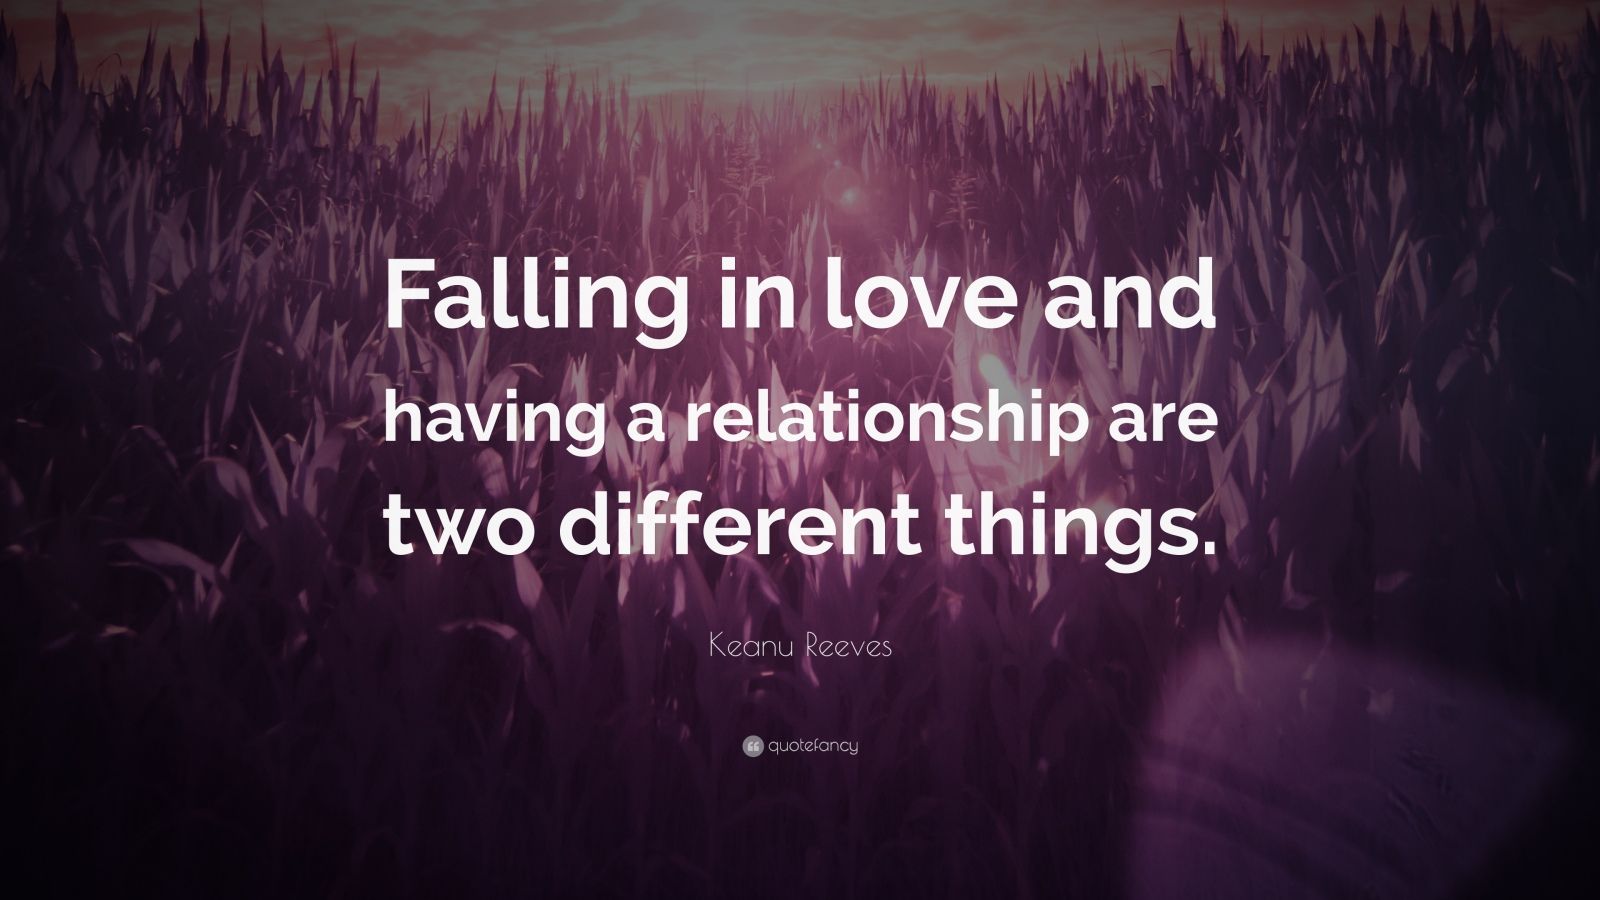 Keanu Reeves Quote: “Falling in love and having a relationship are two ...